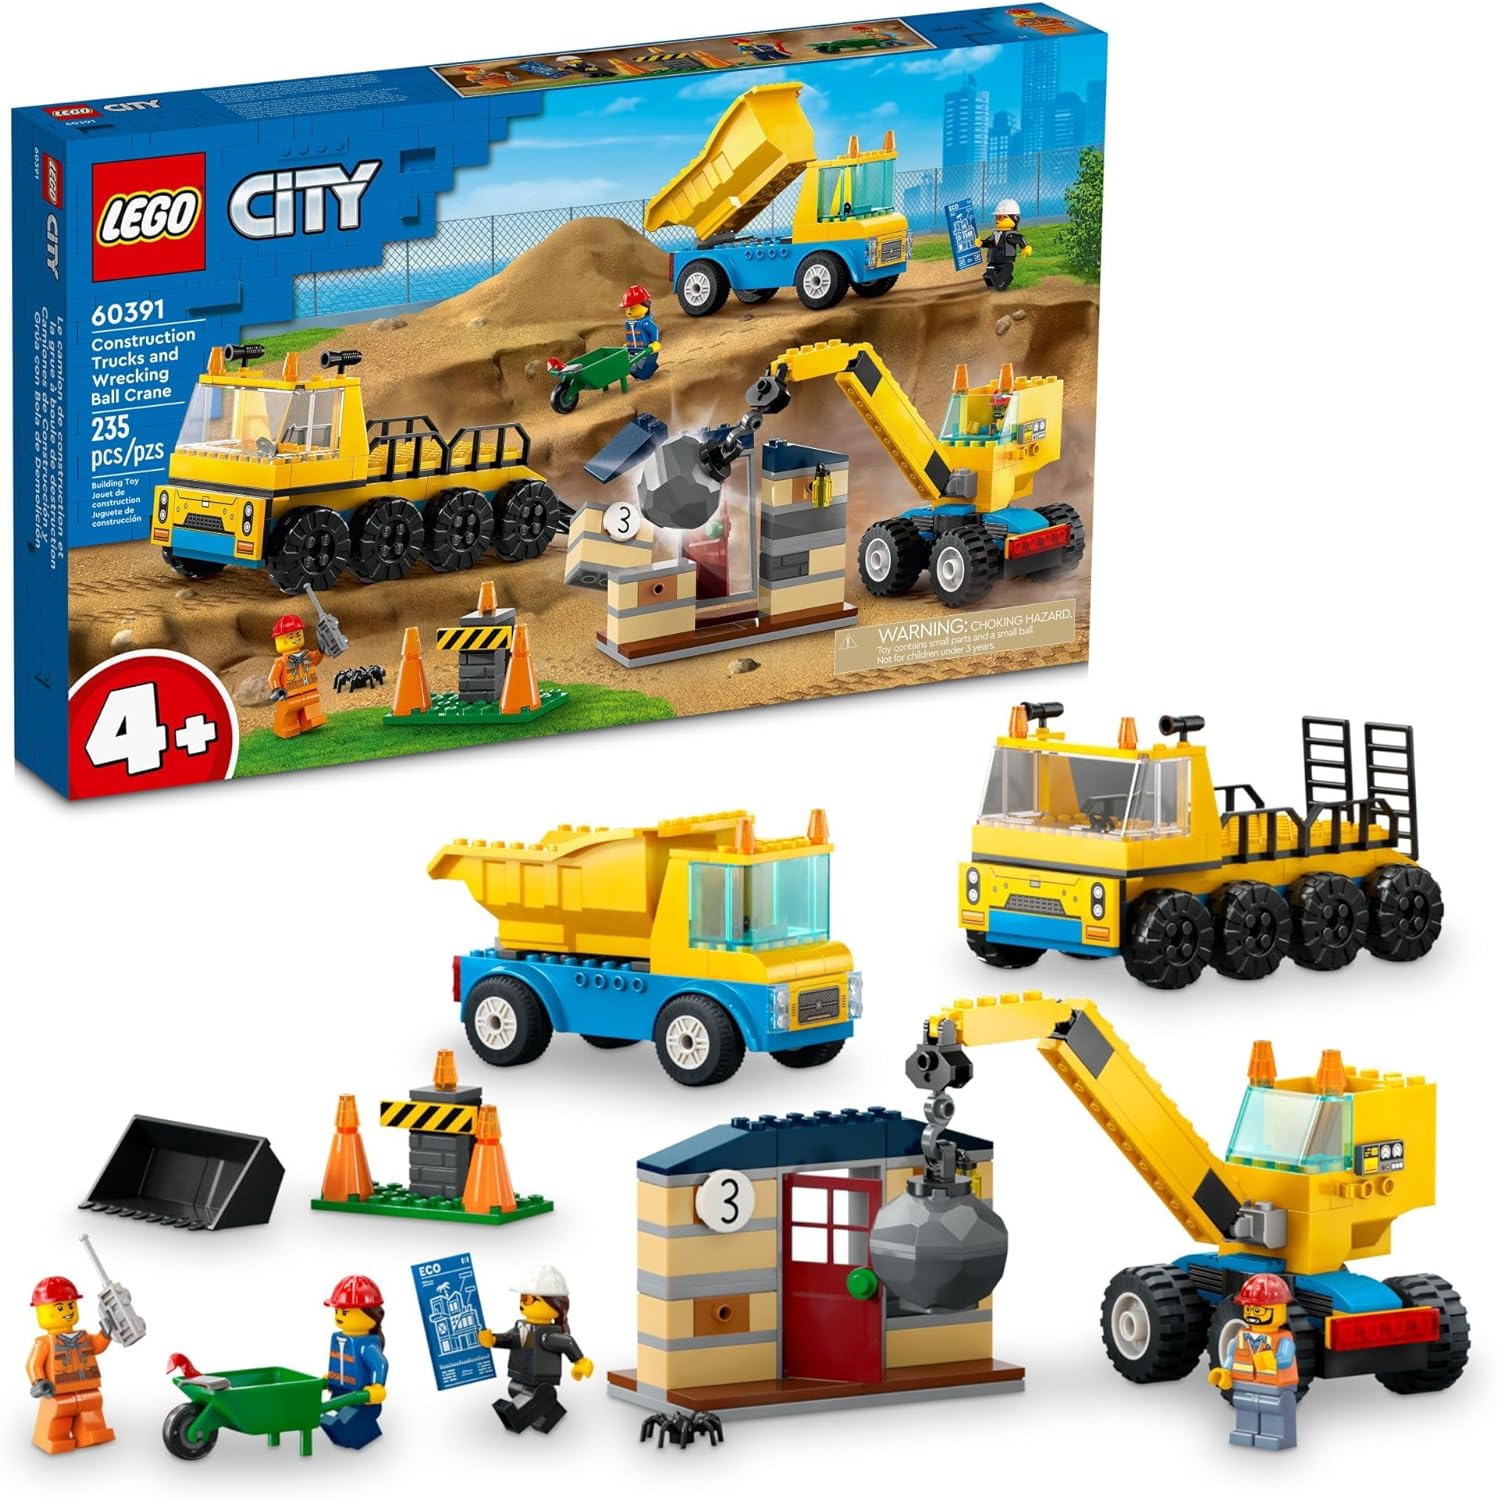 LEGO City Construction Trucks and Wrecking Ball Crane Building Toy Set